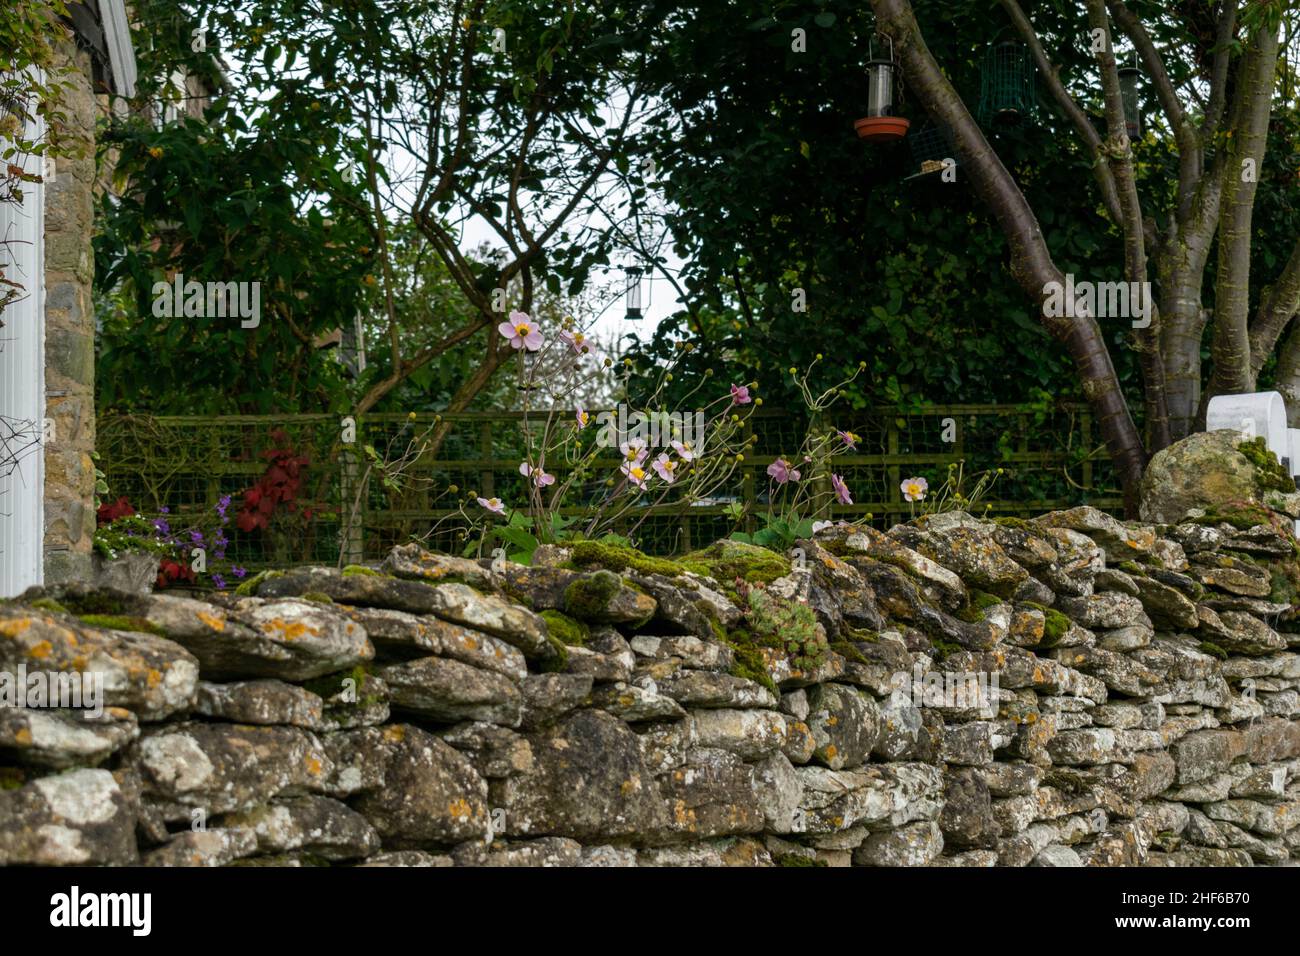 Stone clad wall, quaint and covered with moss with flowering flowers growing on top. Picturesque postcard scene of beautiful English countryside. Coun Stock Photo